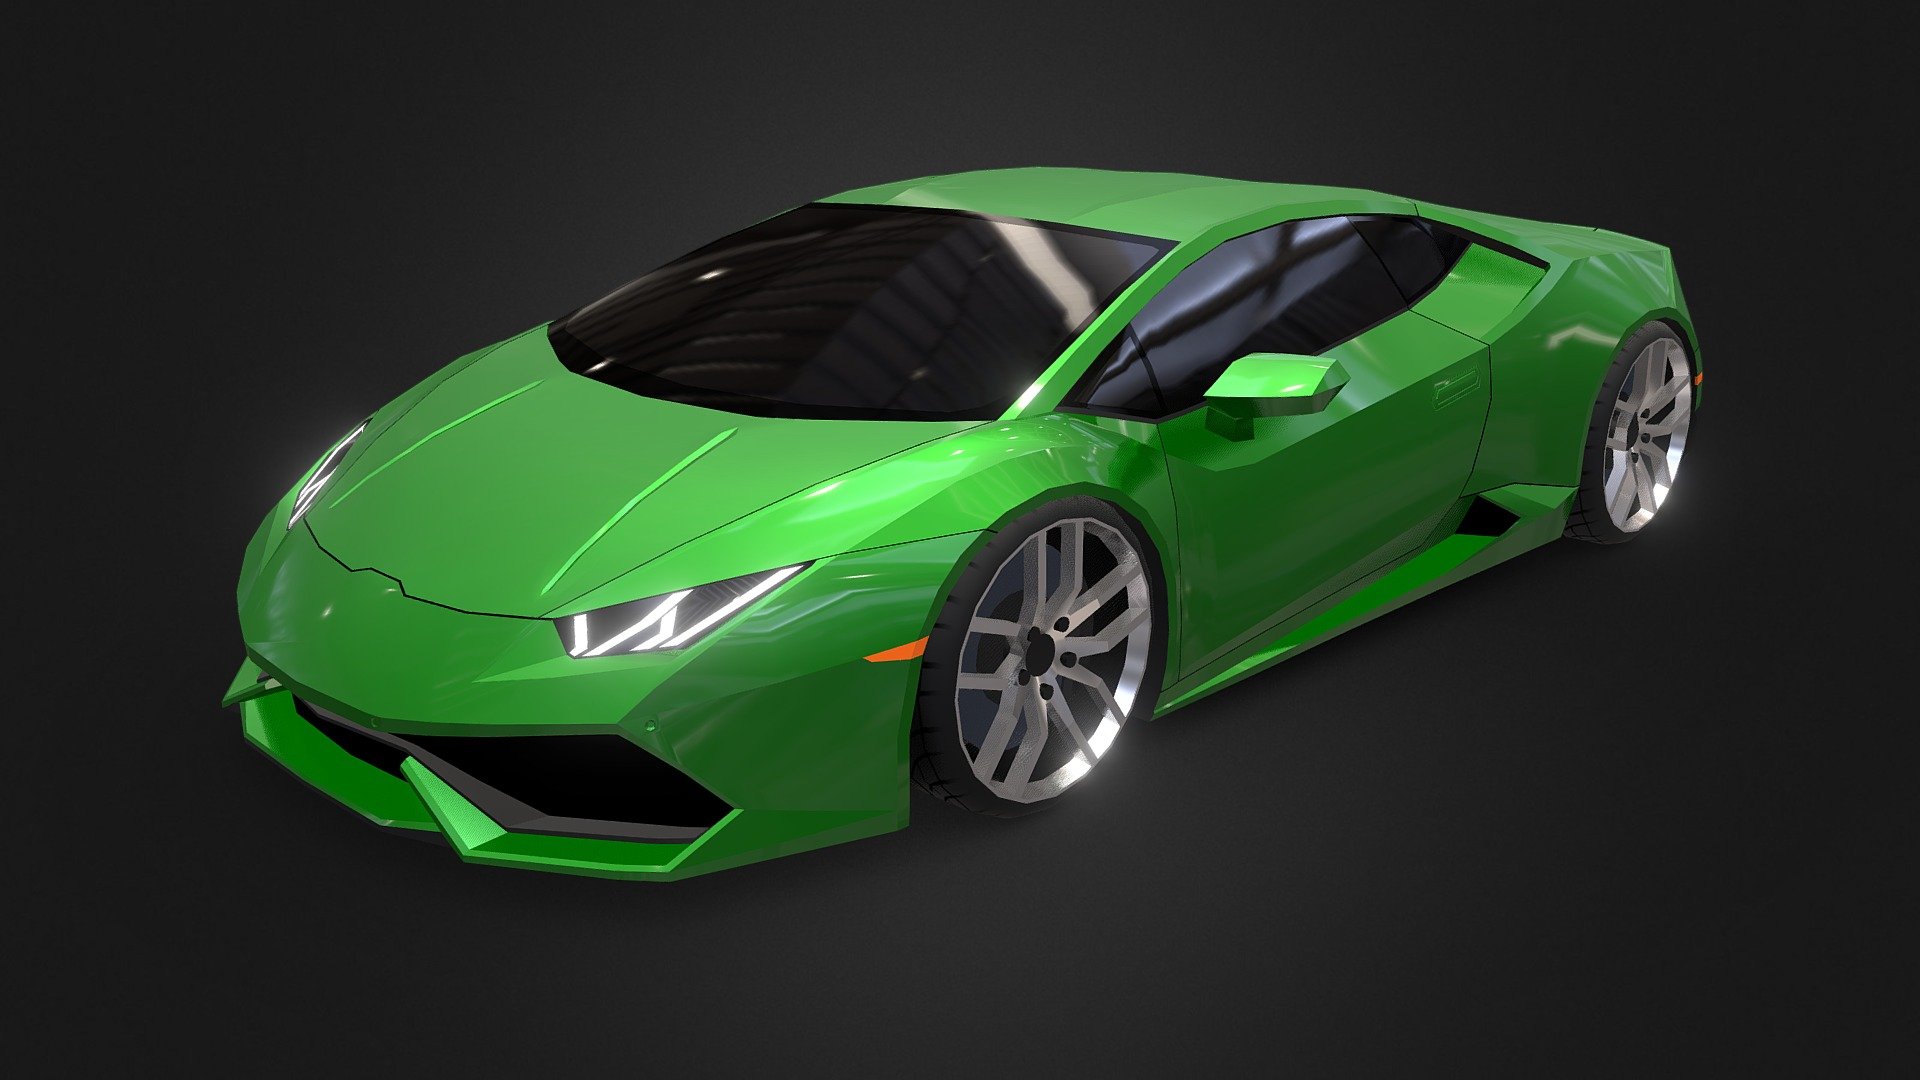 Low-poly 3d model of Lamborghini Huracan created in Blender 3.6

Polygons: 5,513 / Vertices: 6,272 / Triangles: 11,821

Included 3D formats: OBJ / FBX / GLTF-GLB / BLEND - Lamborghini Huracan (low-poly) - Buy Royalty Free 3D model by Rossty (@rossty3d) 3d model